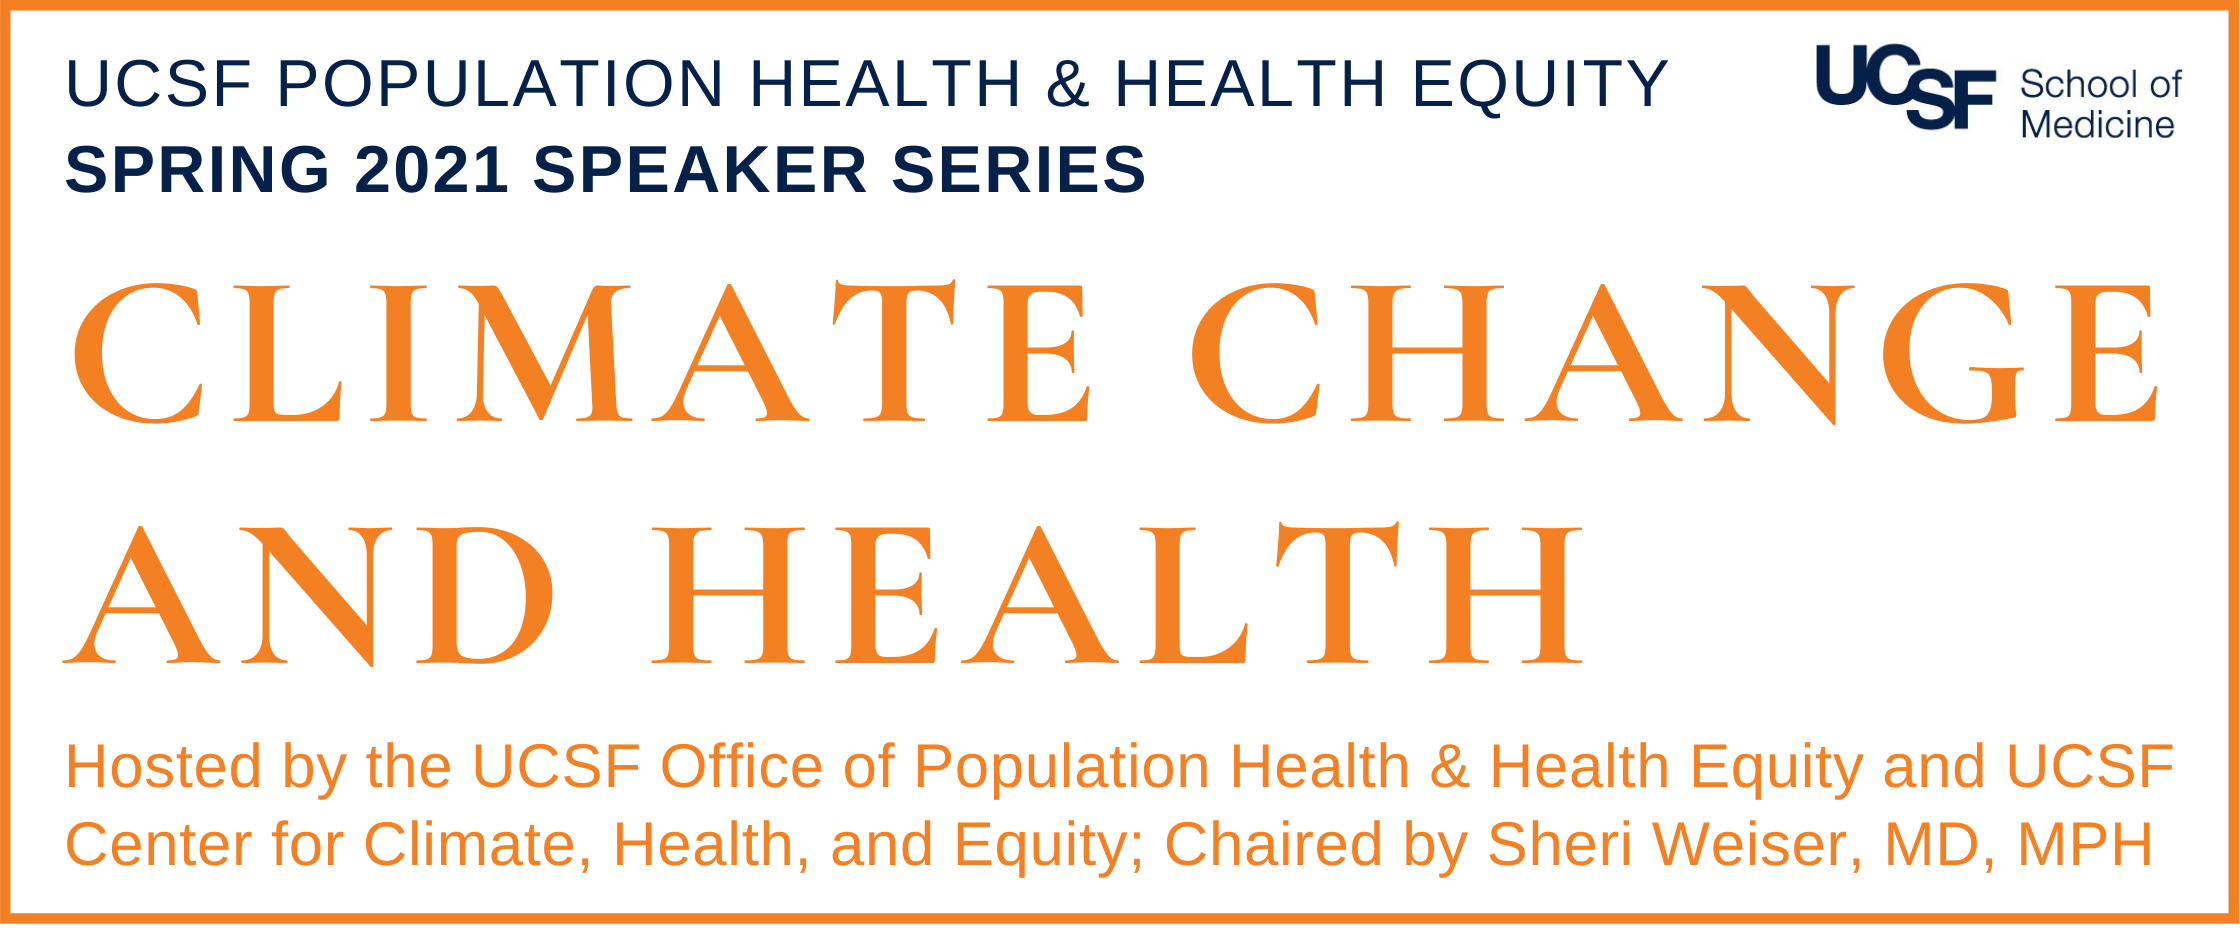 UCSF Population Health & Health Equity Spring 2021 Speaker Series: Climate Change and Health; Hosted by the UCSF Office of Population Health & Health Equity and UCSF Center for Climate, Health, and Equity; Chaired by Sheri Weiser, MD, MPH